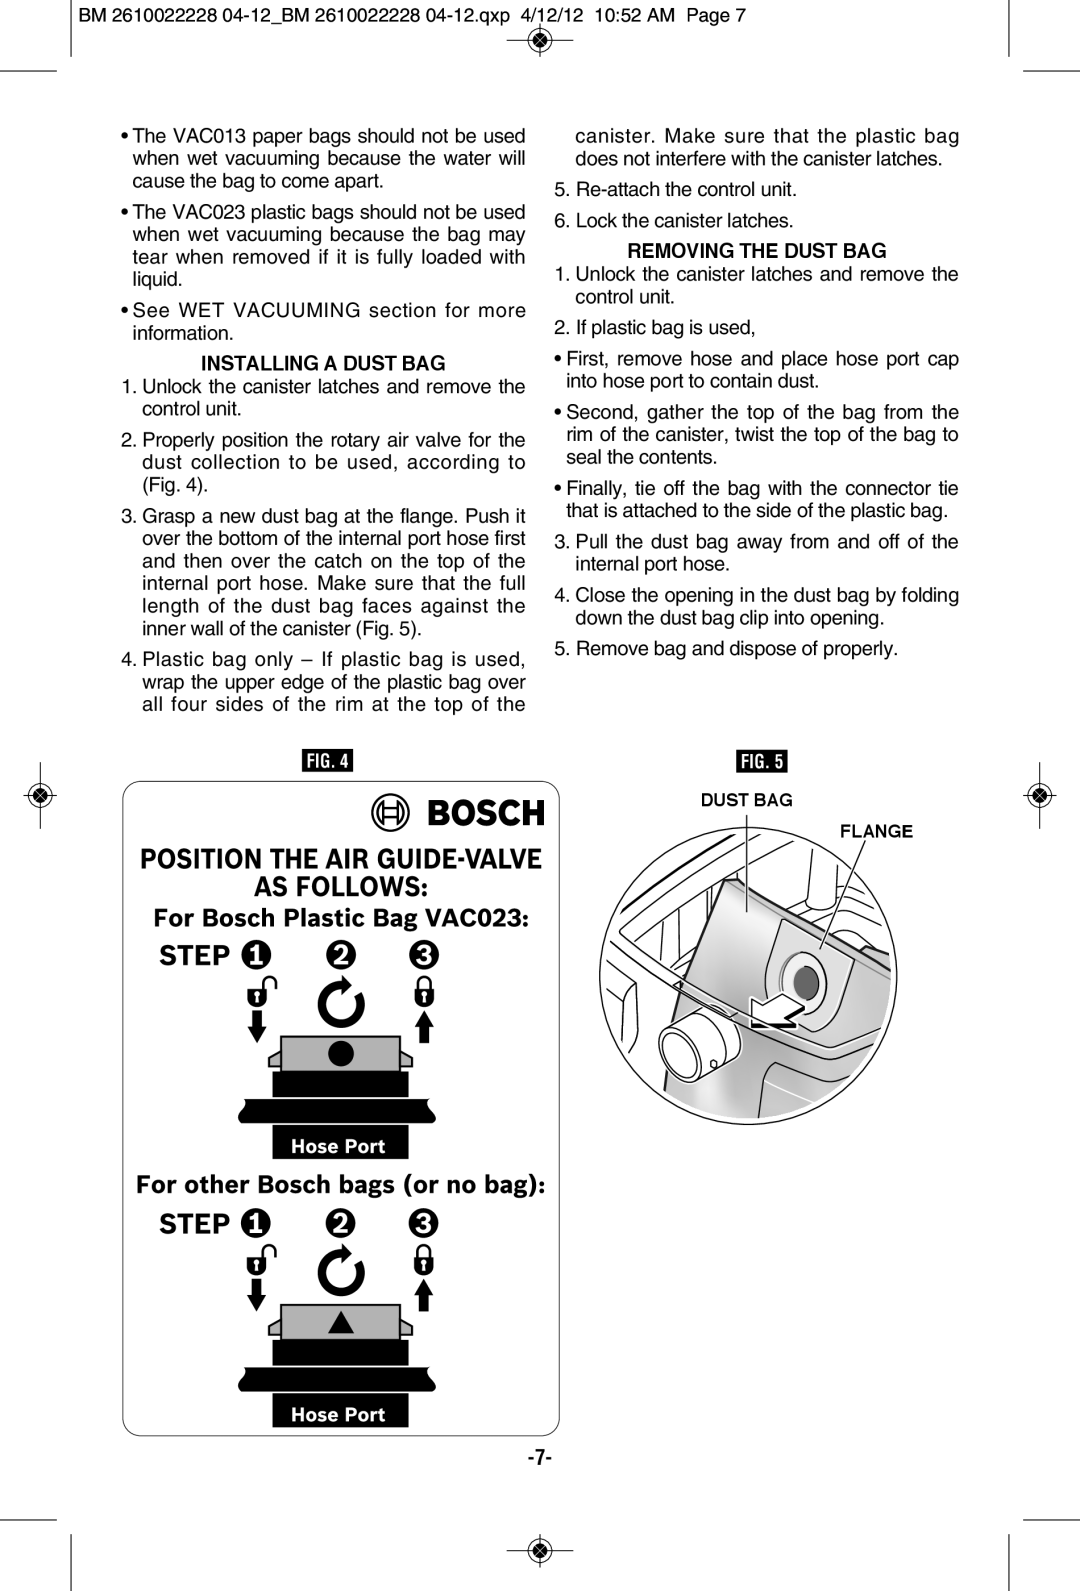 Bosch Power Tools 3931A-PB manual Installing A Dust Bag, Removing The Dust Bag, Dust Bag Flange 